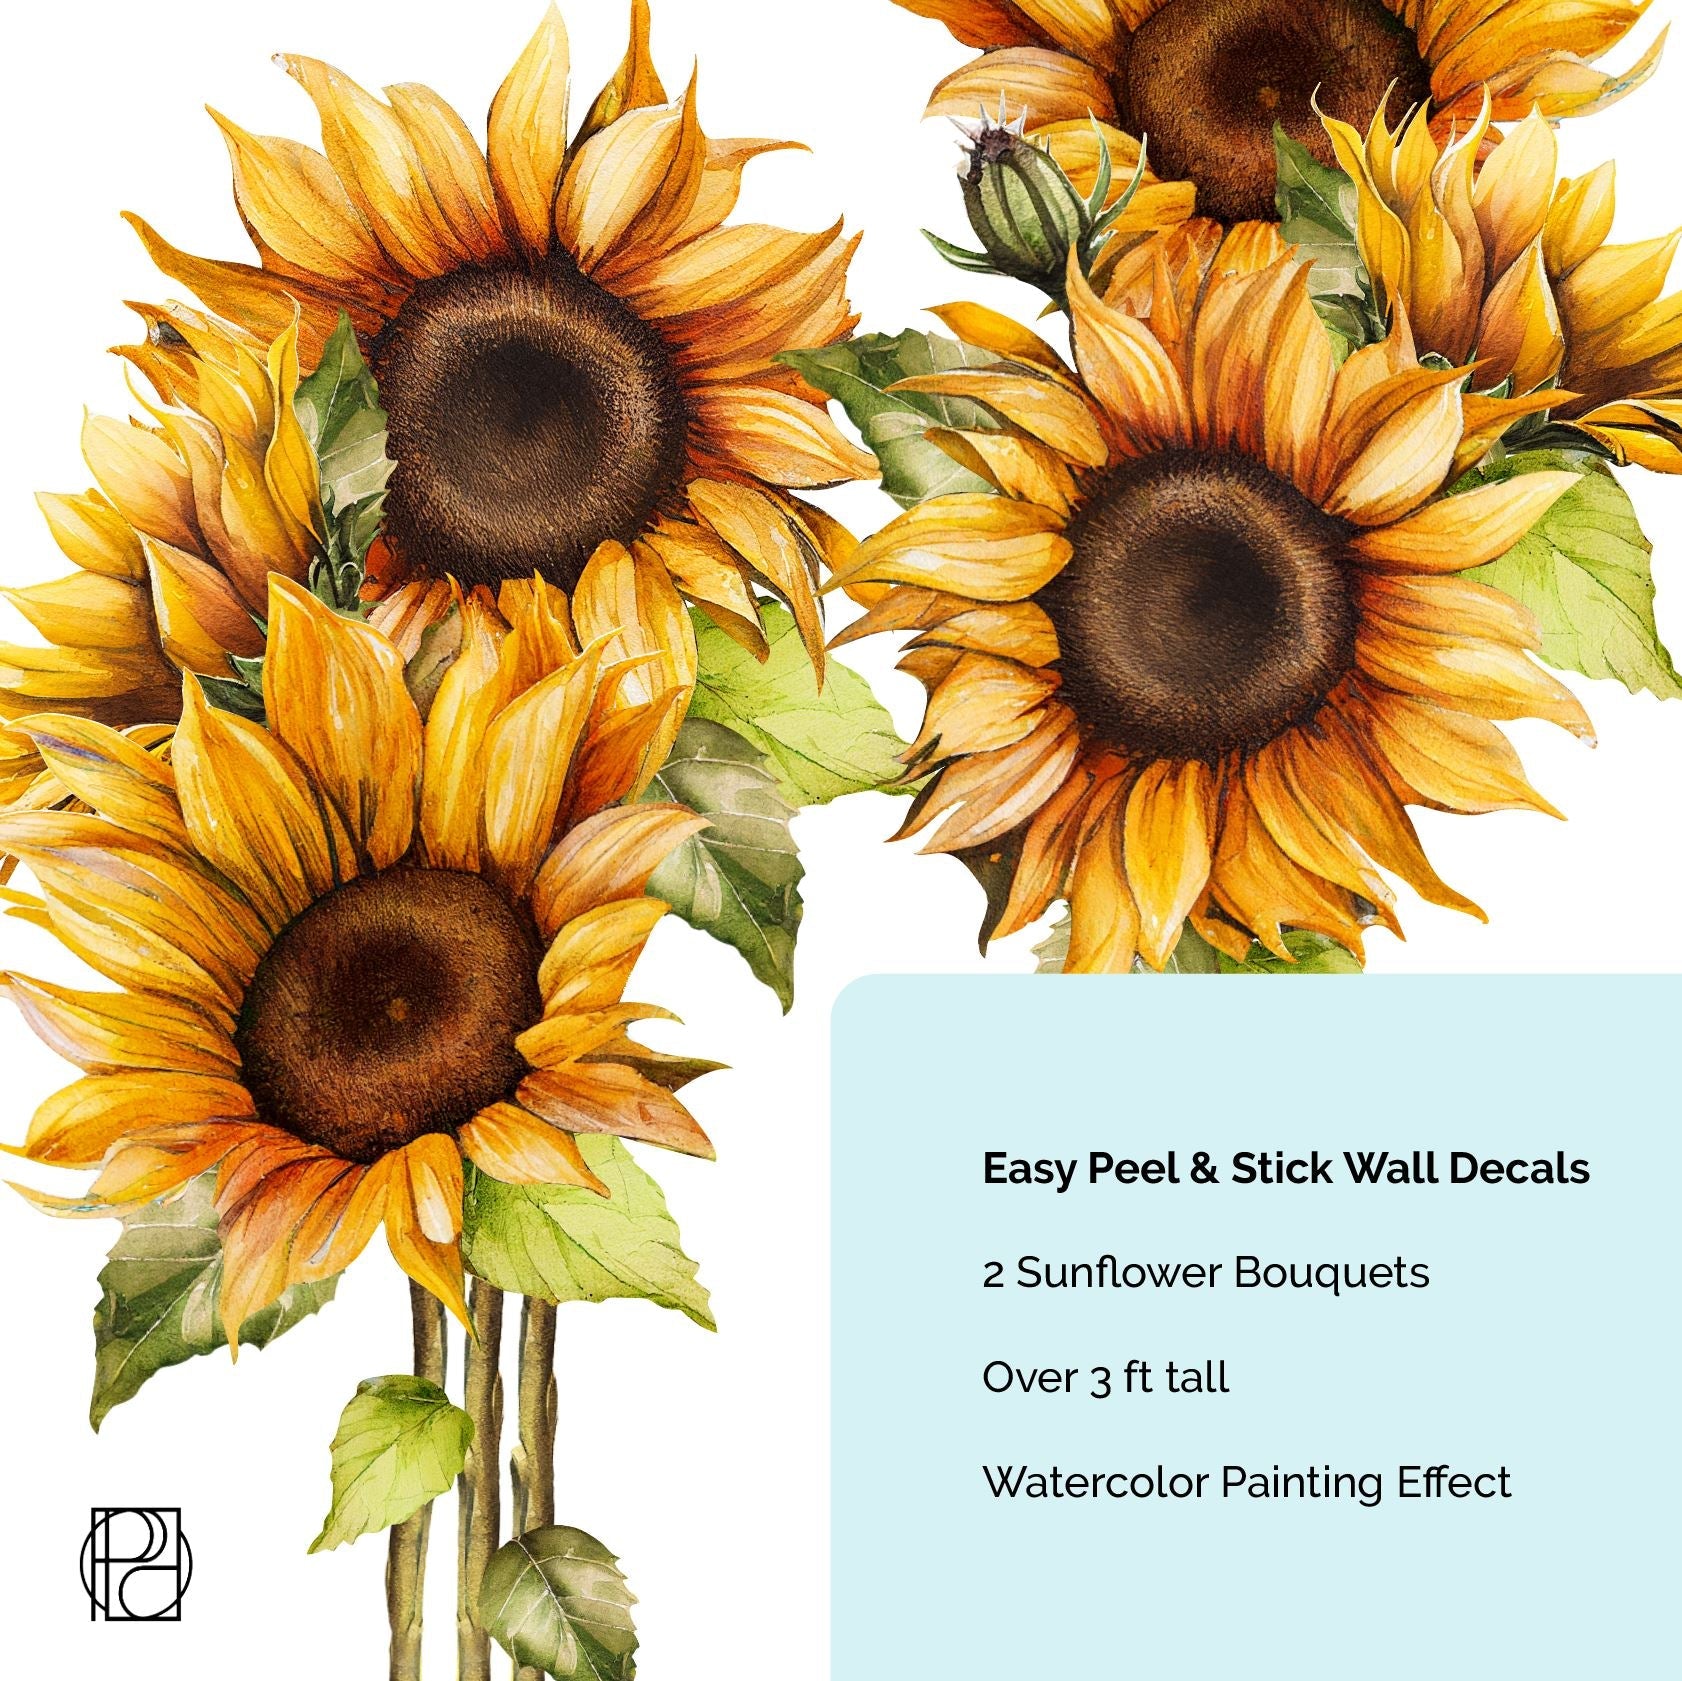 Sunflowers Wall Stickers | Sunflower with Stems Wall Décor | Sunflower Mural - Home Decor Decals - Picture Perfect Decals